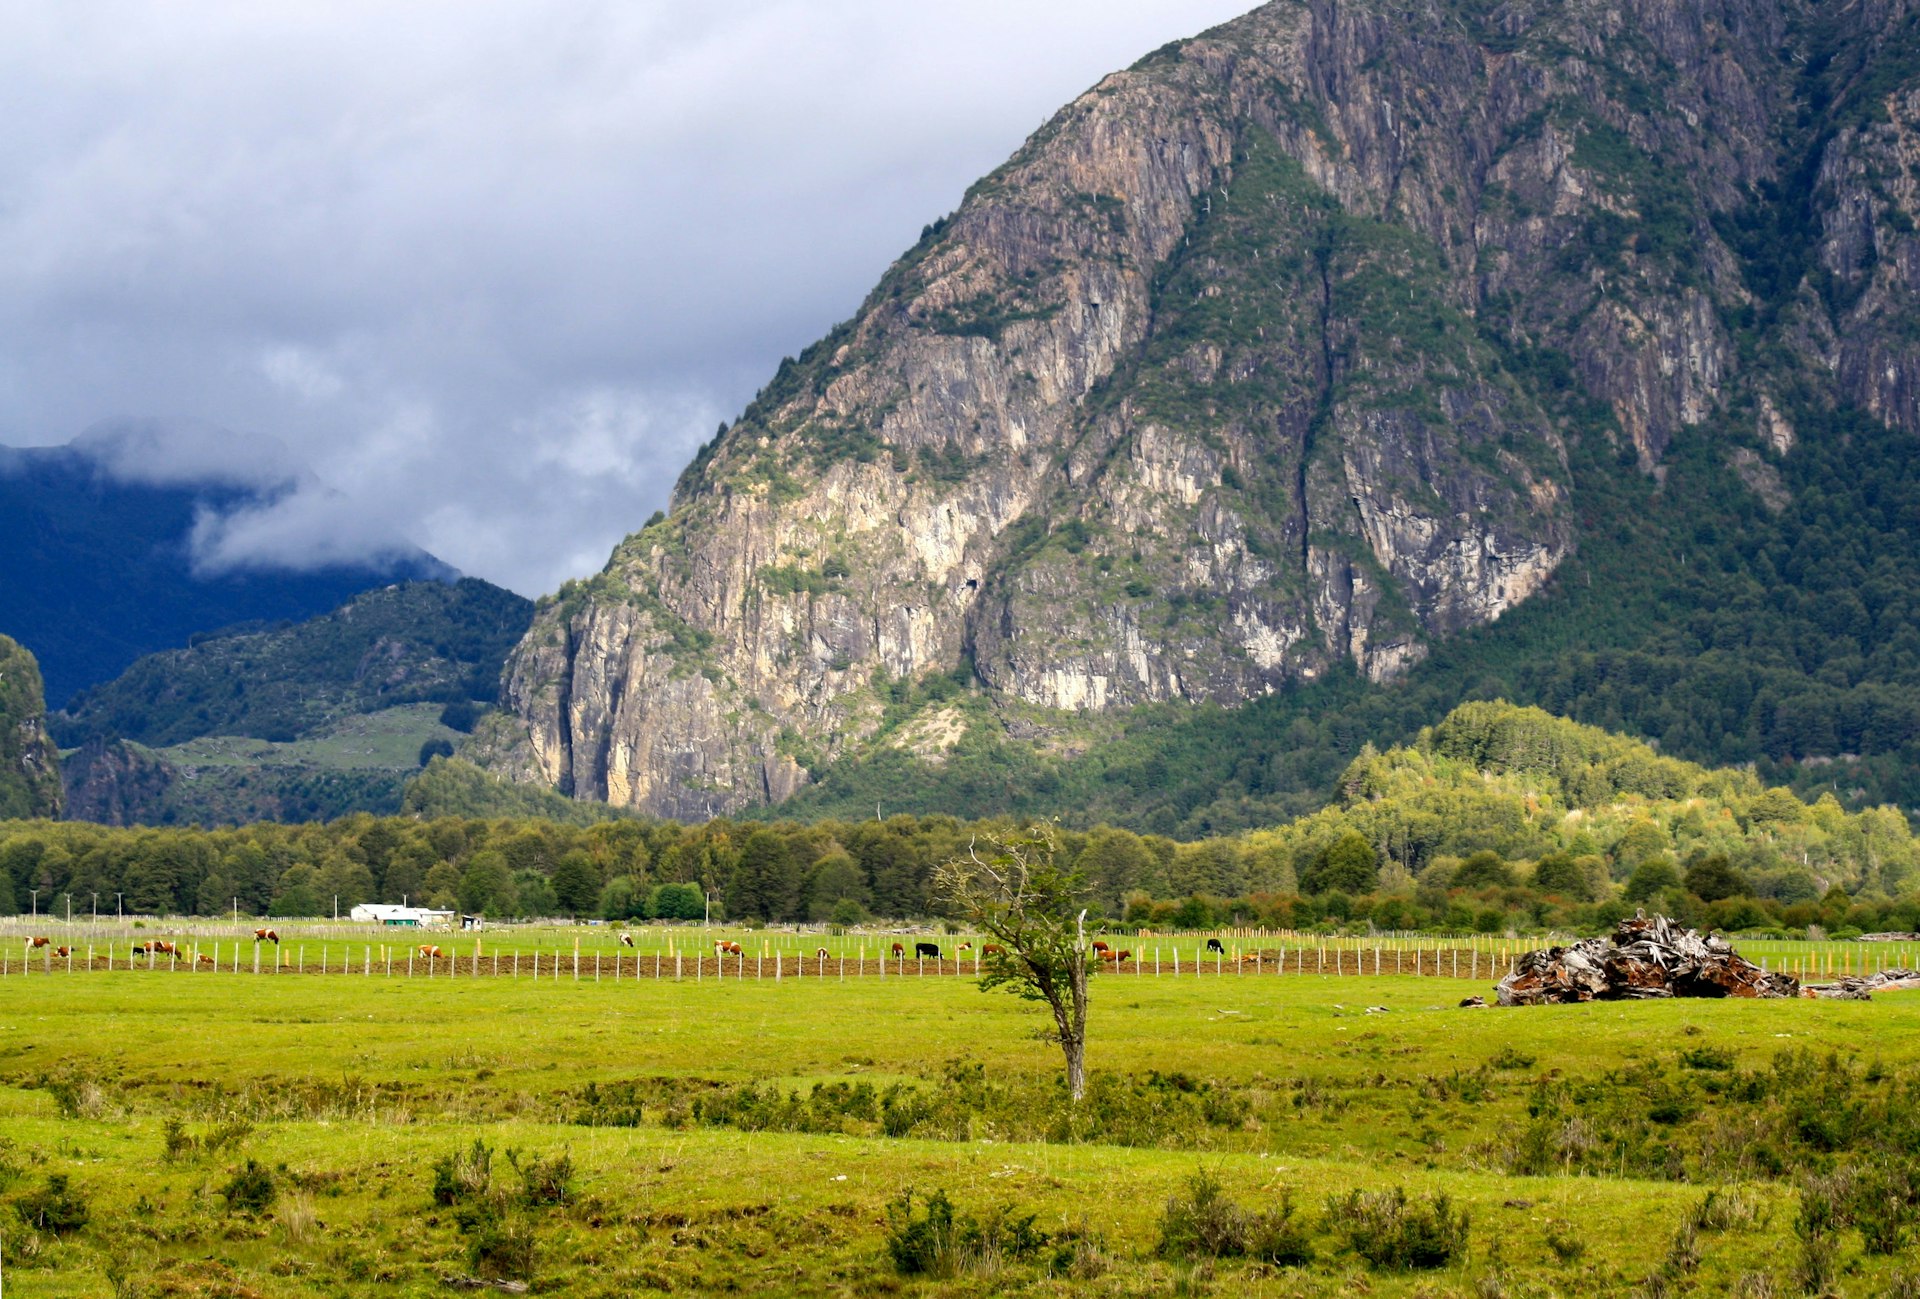 The rural landscape seen on Chile's Carretera Austral © Carolyn McCarthy